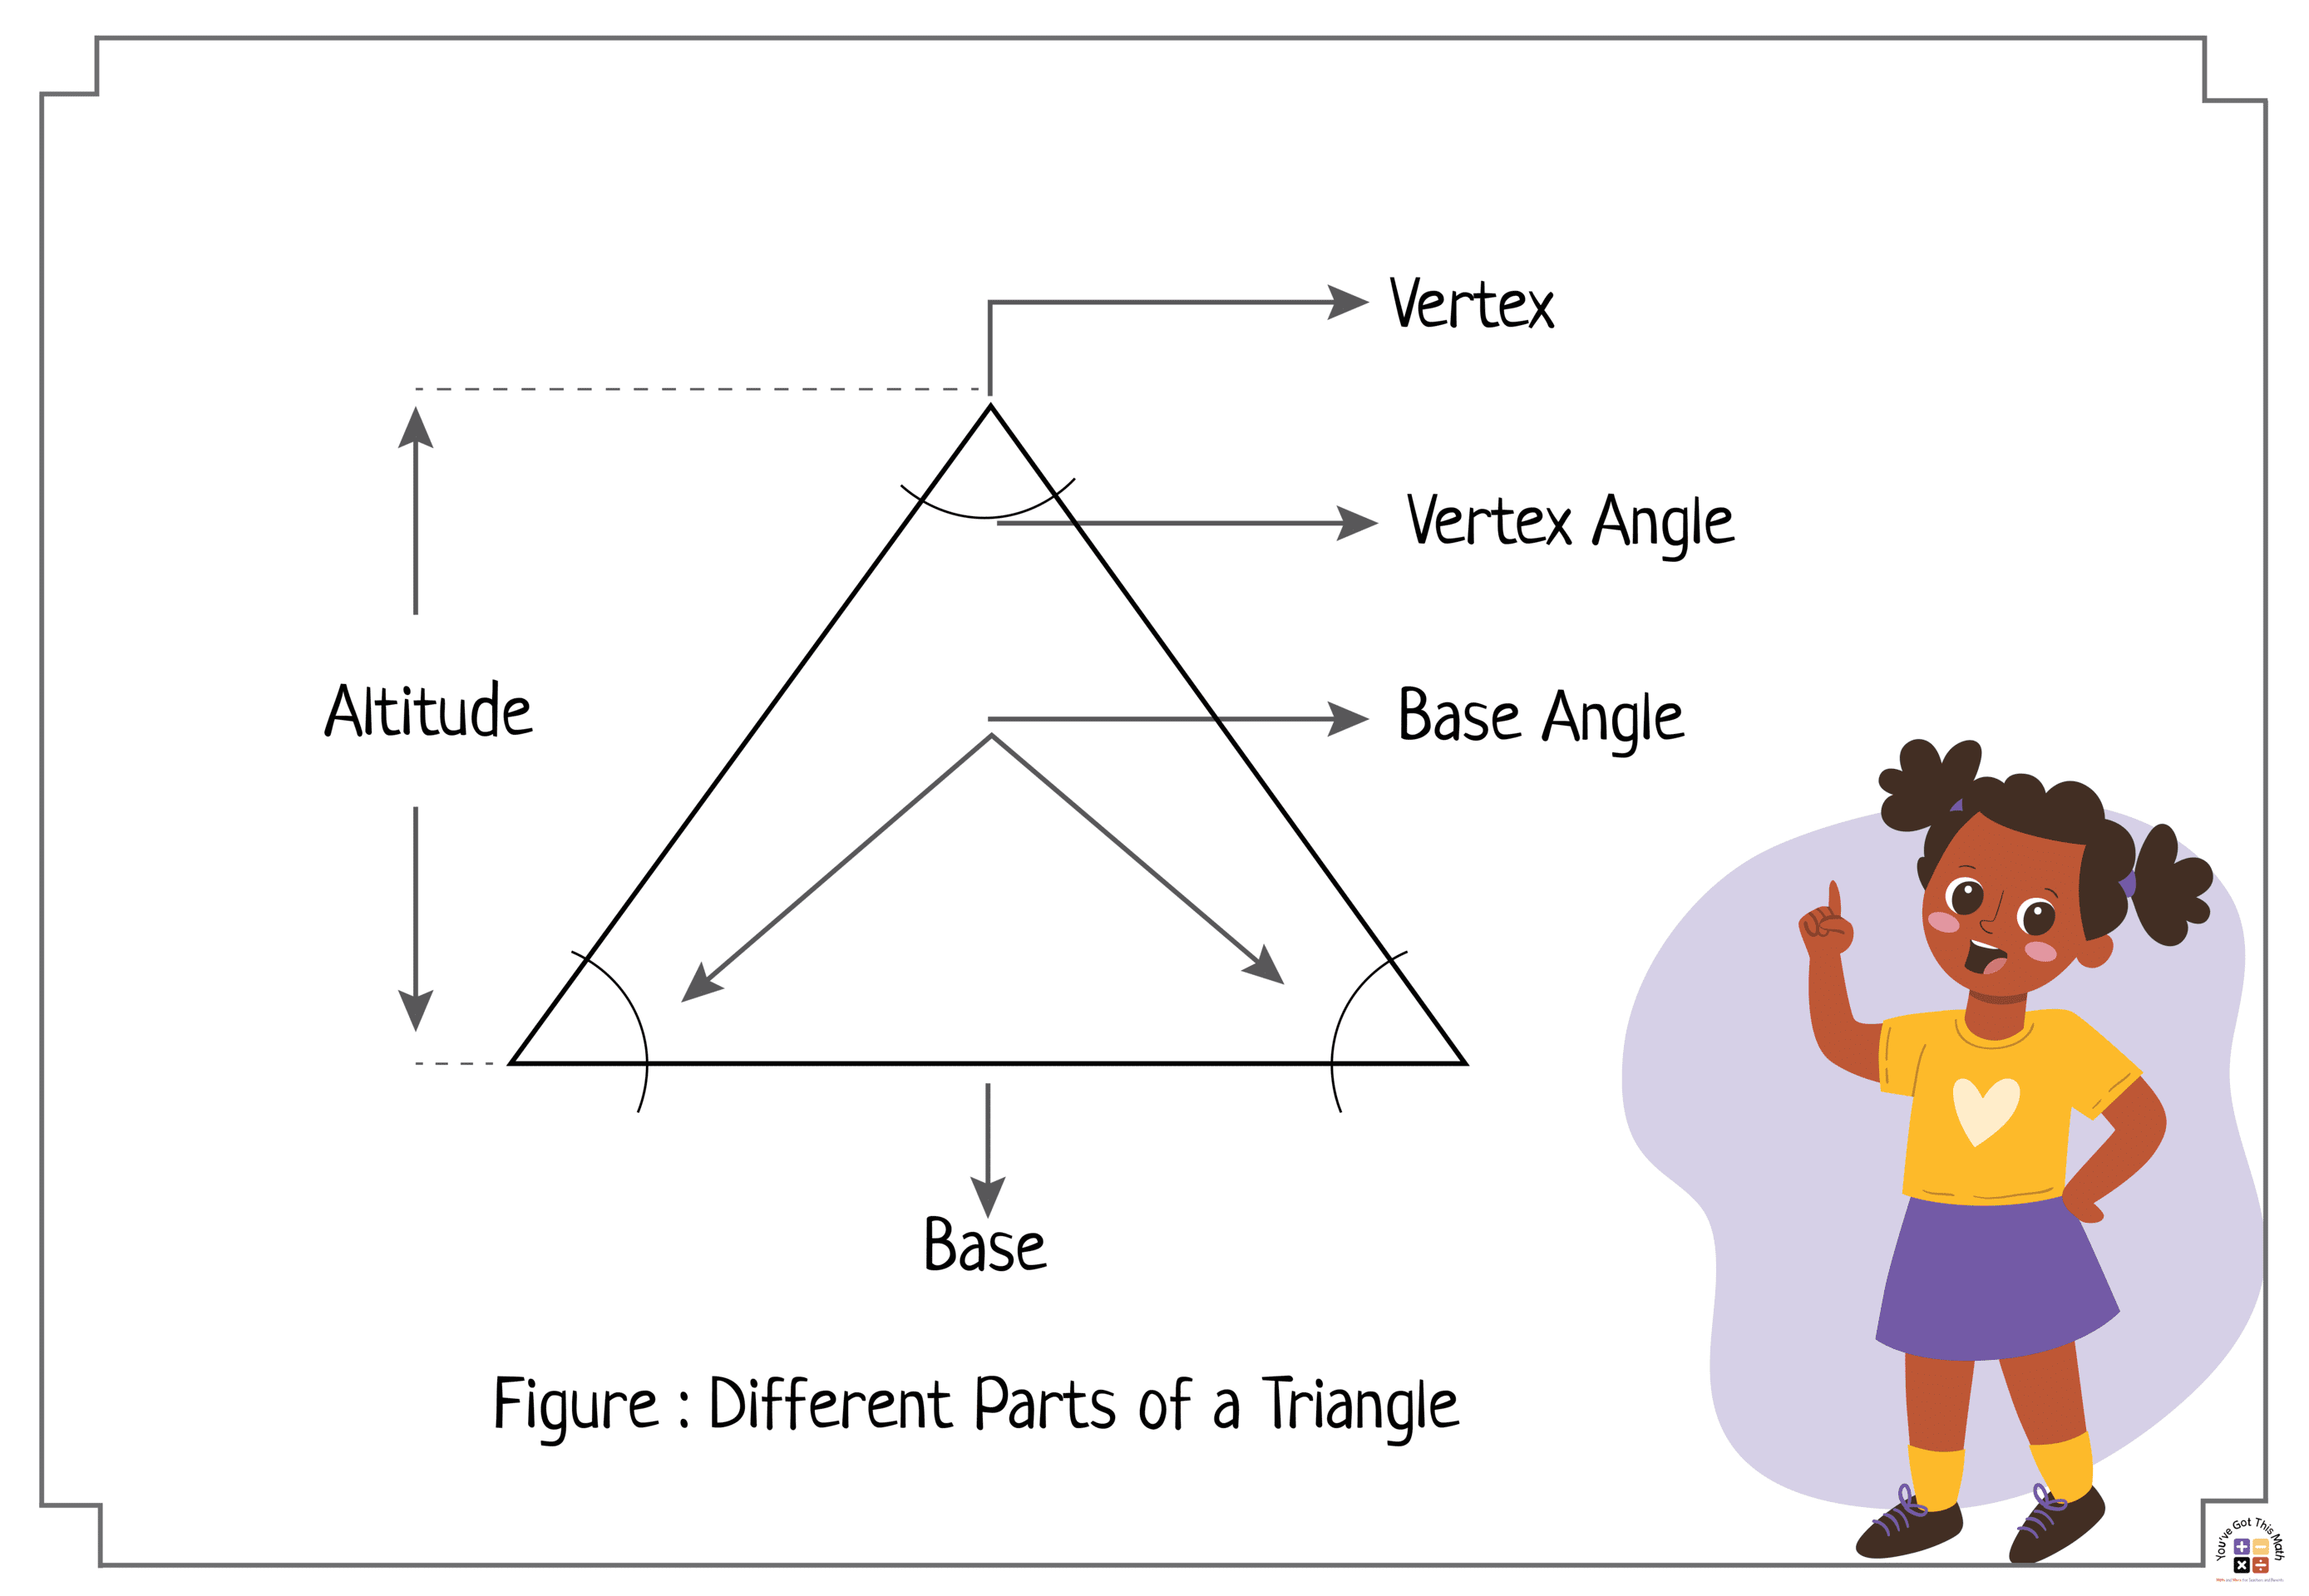 Explaining Different Parts of a Triangle